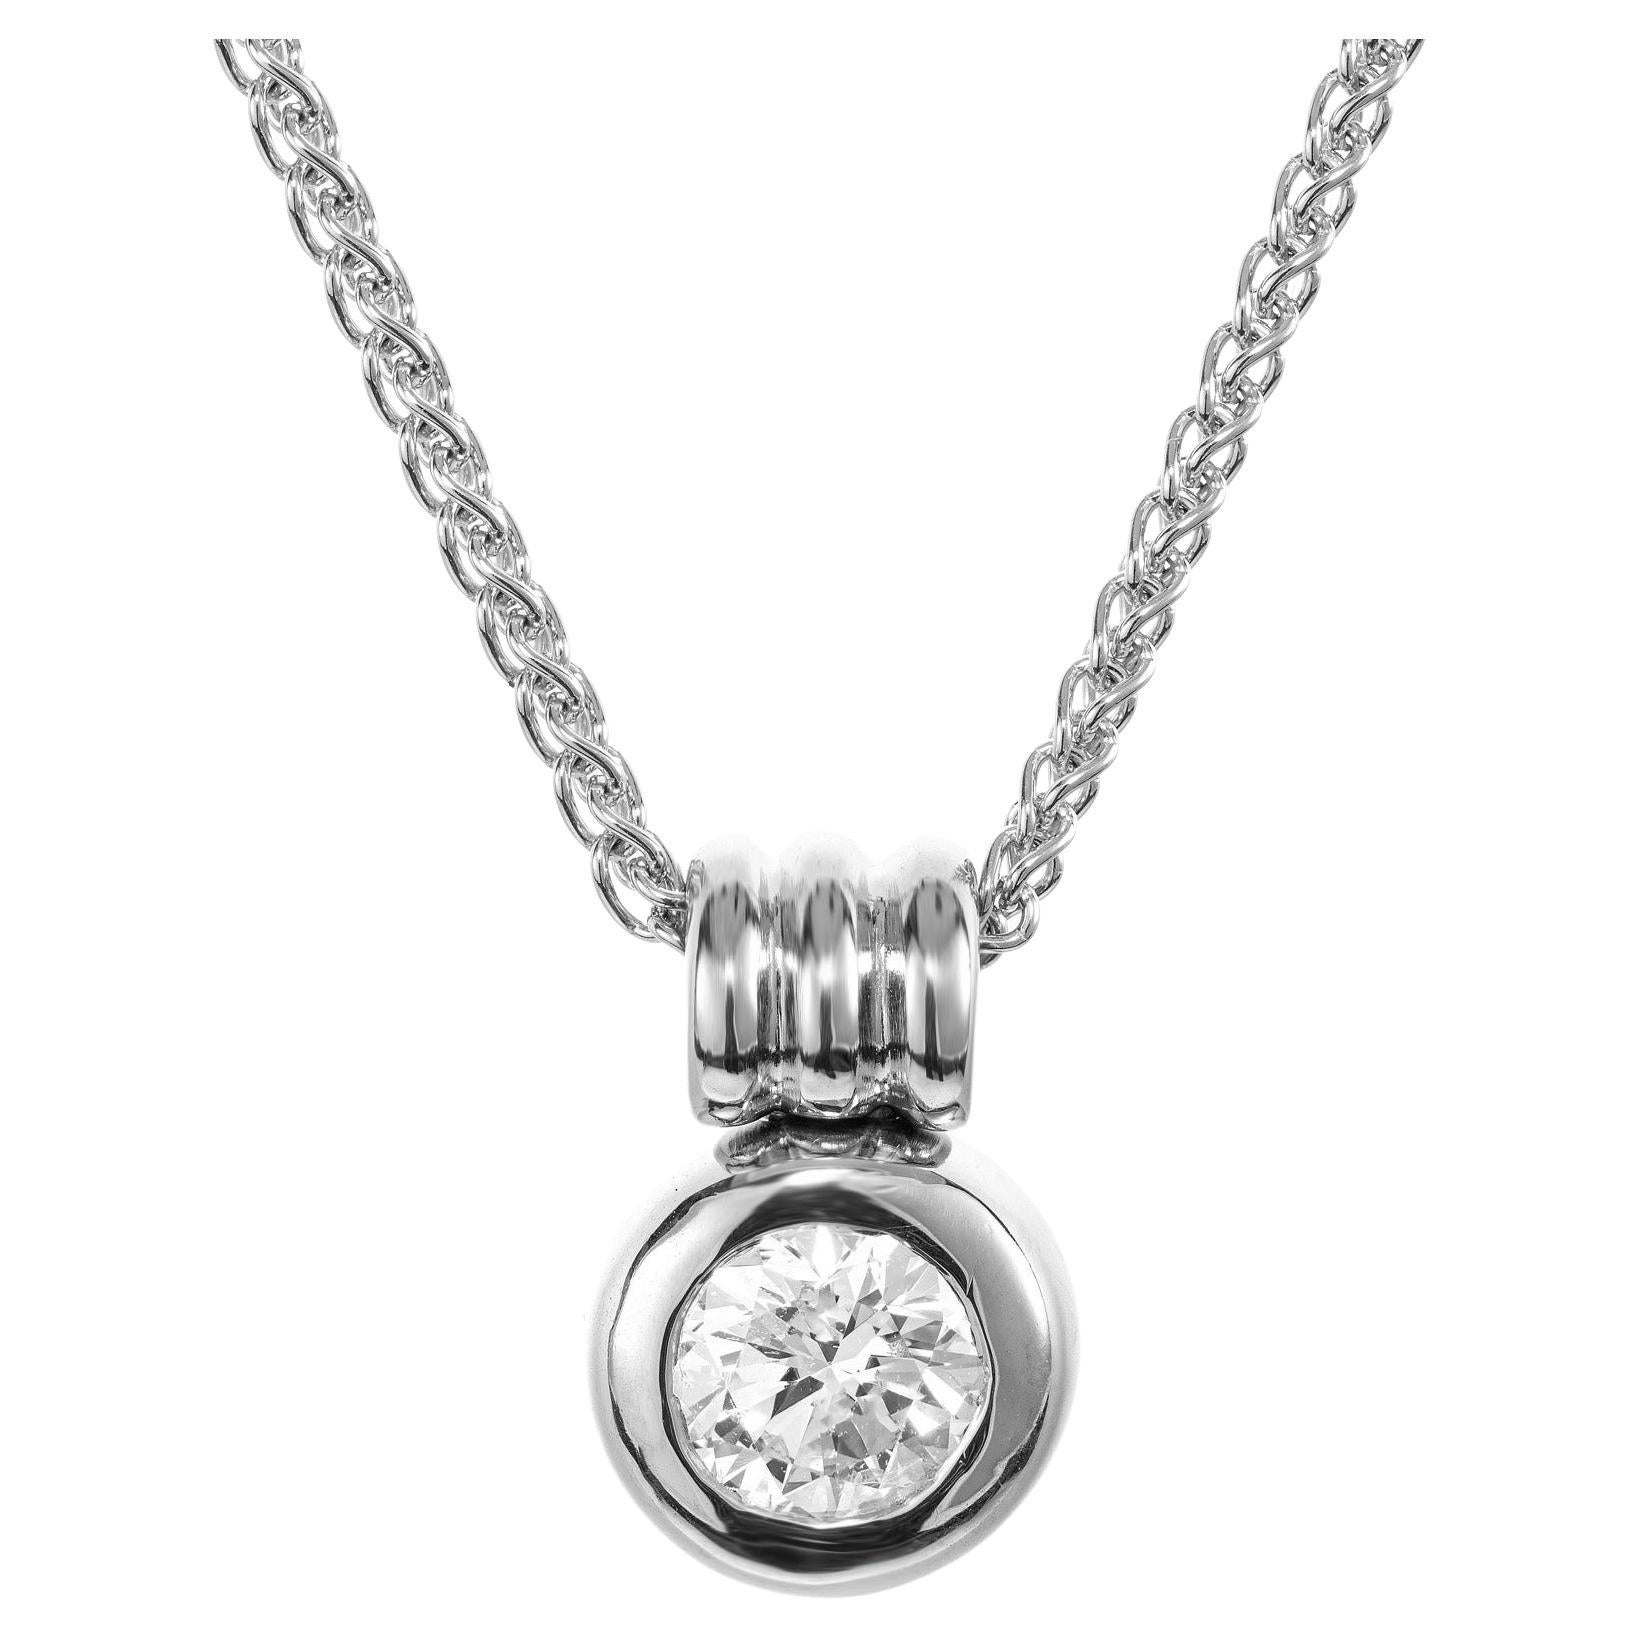 EGL Certified 1.23 Carat Round Diamond White Gold Pendant Necklace For Sale